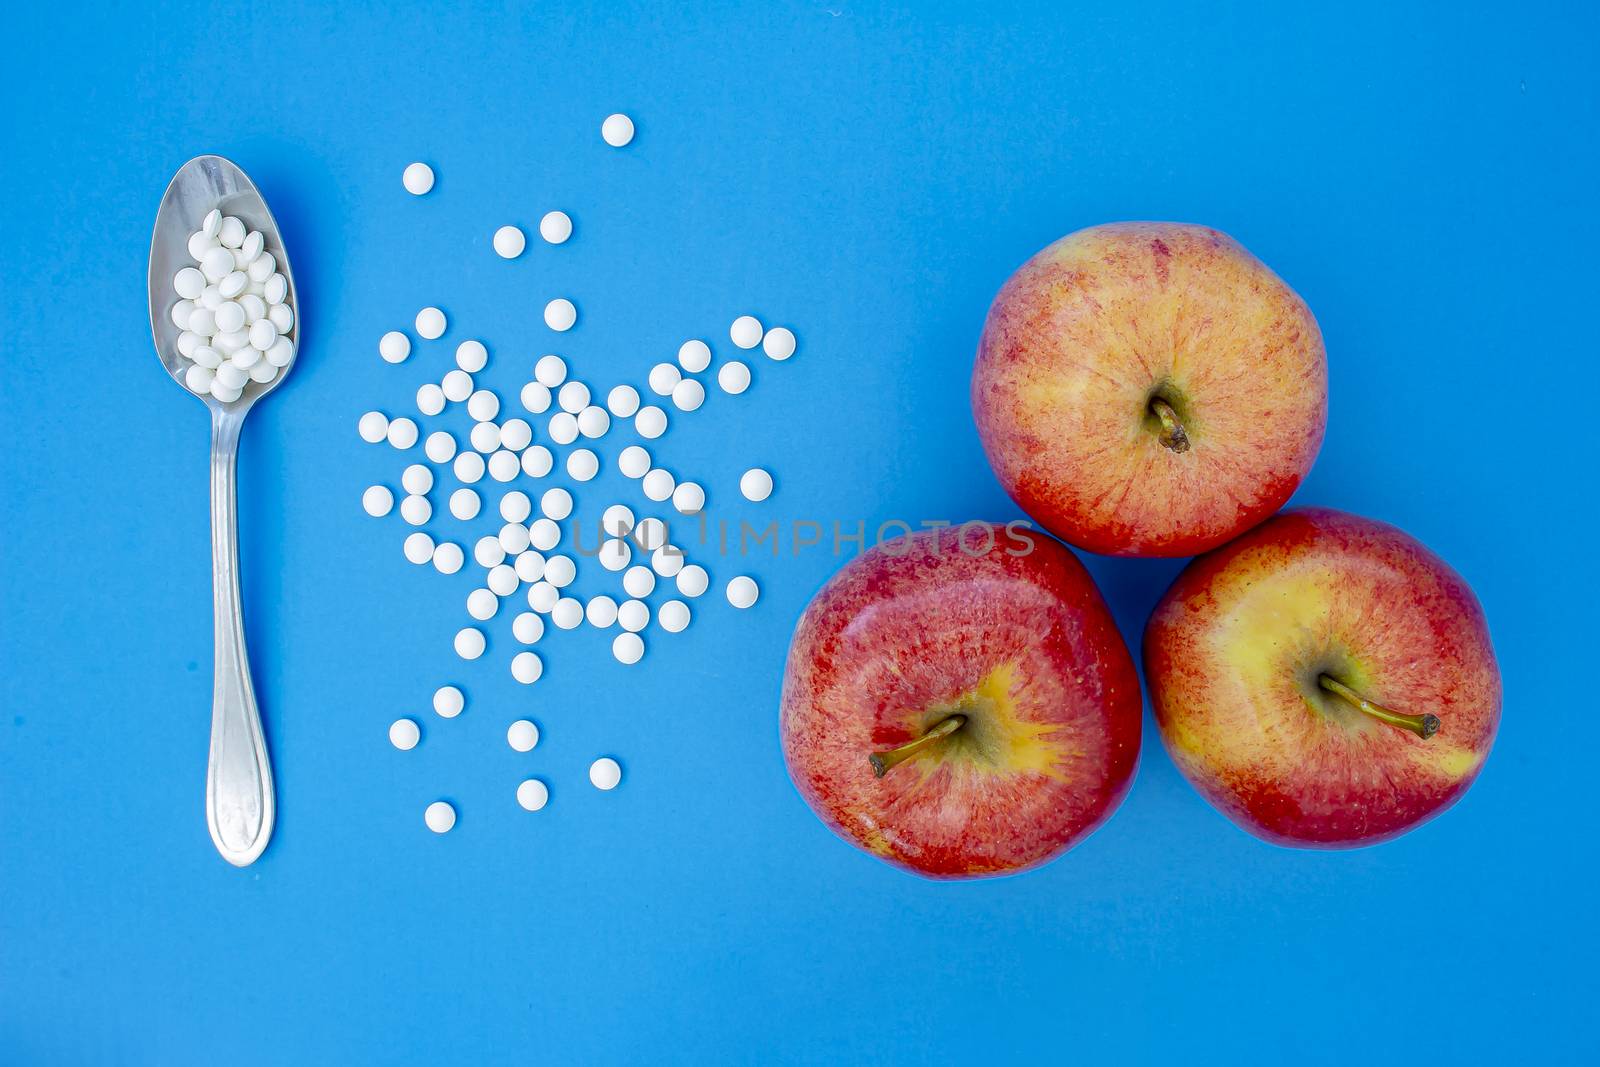 A spoon with supplements vitamins pills next to apples on a blue background